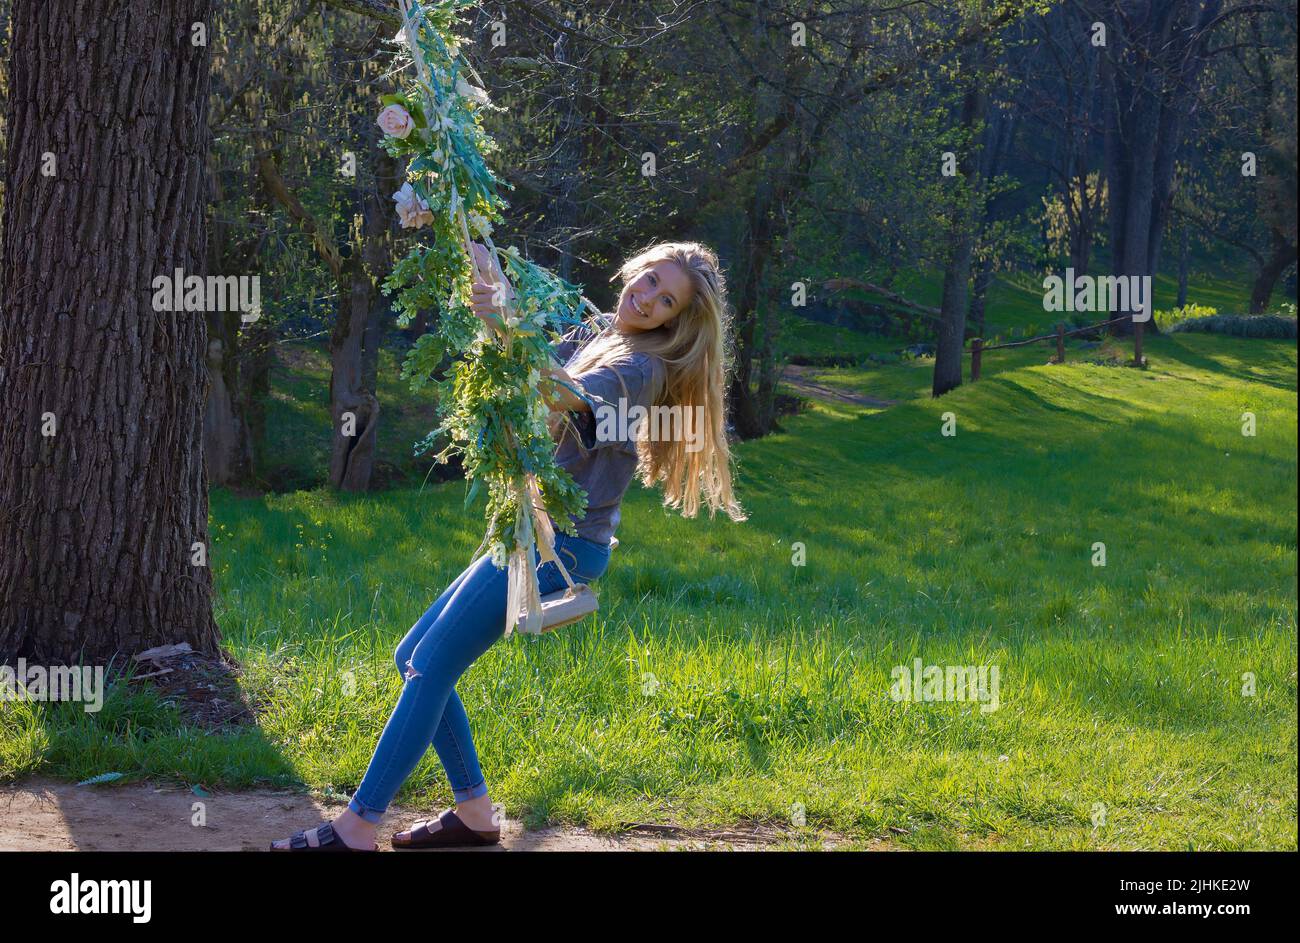 A young woman enjoys swinging on an outdoor swing decorated with flowers. Stock Photo